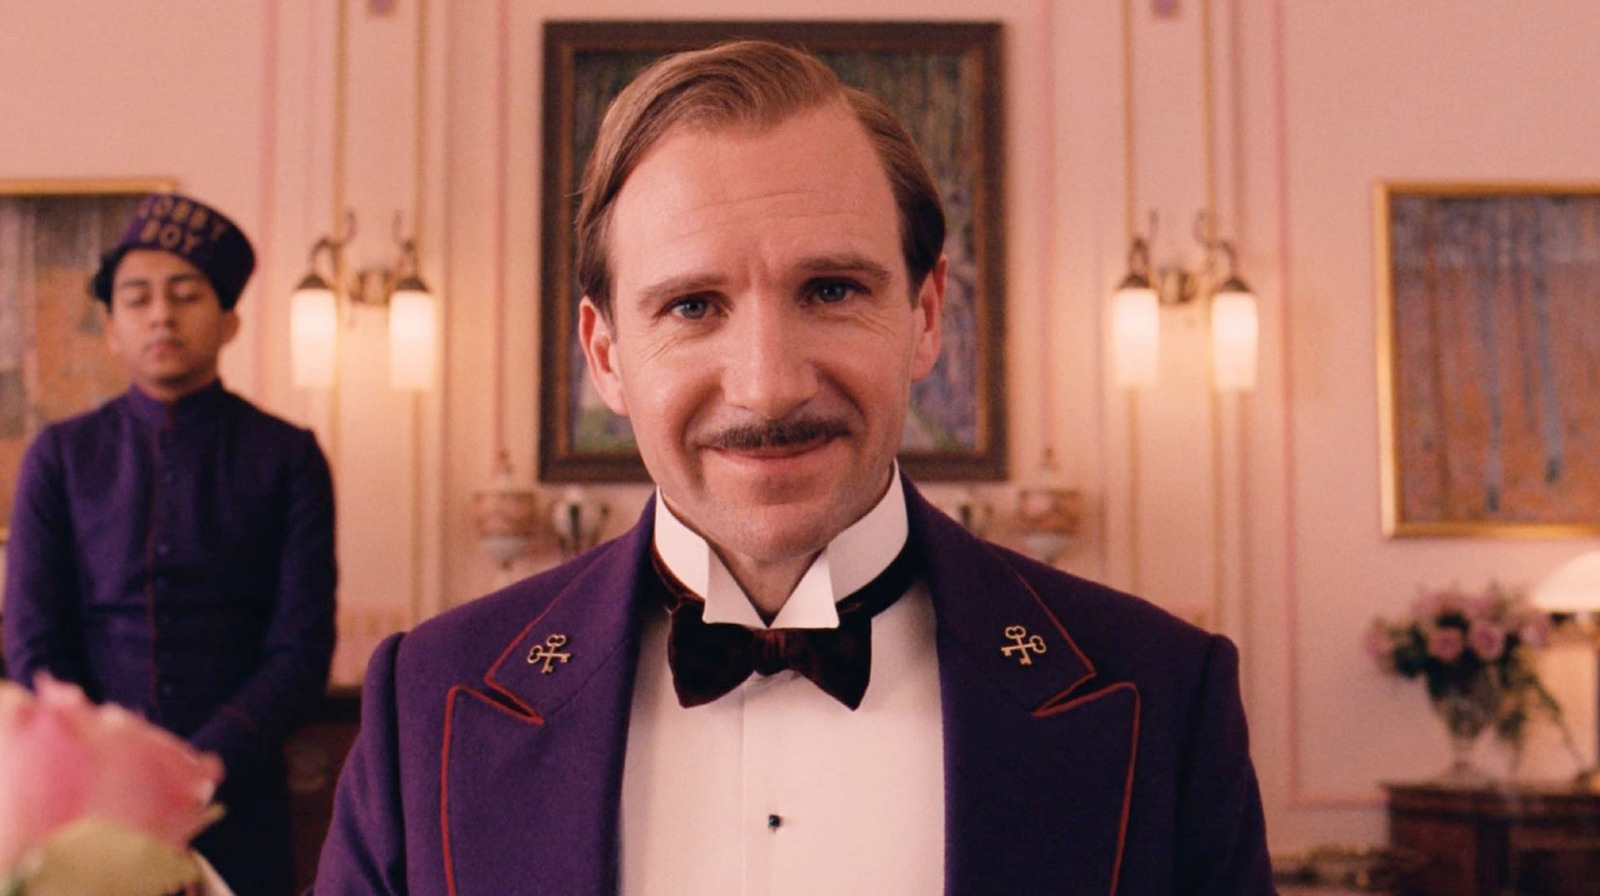 Ralph Fiennes in a concierge uniform standing in a hotel lobby from &quot;The Grand Budapest Hotel.&quot;